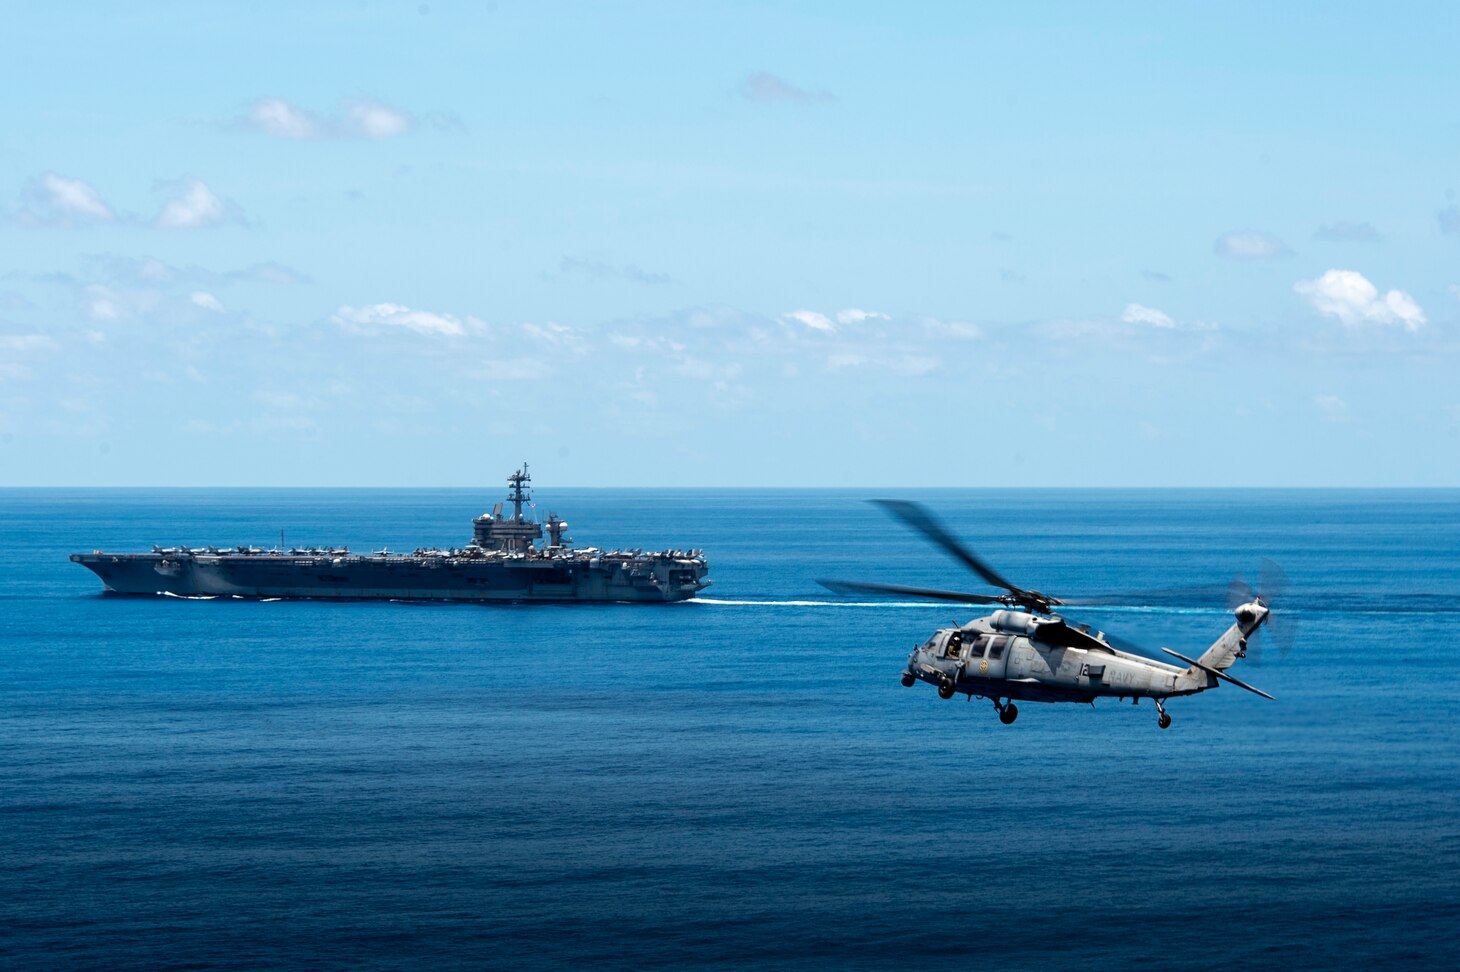 INDIAN OCEAN (Dec. 17, 2021) An MH-60S Sea Hawk, assigned to the “Black Knights” of Helicopter Sea Combat Squadron (HSC) 4, flies next to Nimitz-class aircraft carrier USS Carl Vinson (CVN 70) while transiting the Indian Ocean during a bilateral training exercise with the Royal Australian Air Force, Dec. 17, 2021. Carl Vinson Carrier Strike Group and elements of the Royal Australian Navy and Air Force are conducting a bilateral training exercise to test and refine warfighting capabilities in support of a free and open Indo-Pacific. (U.S. Navy photo by Mass Communication Specialist 2nd Class Haydn N. Smith)